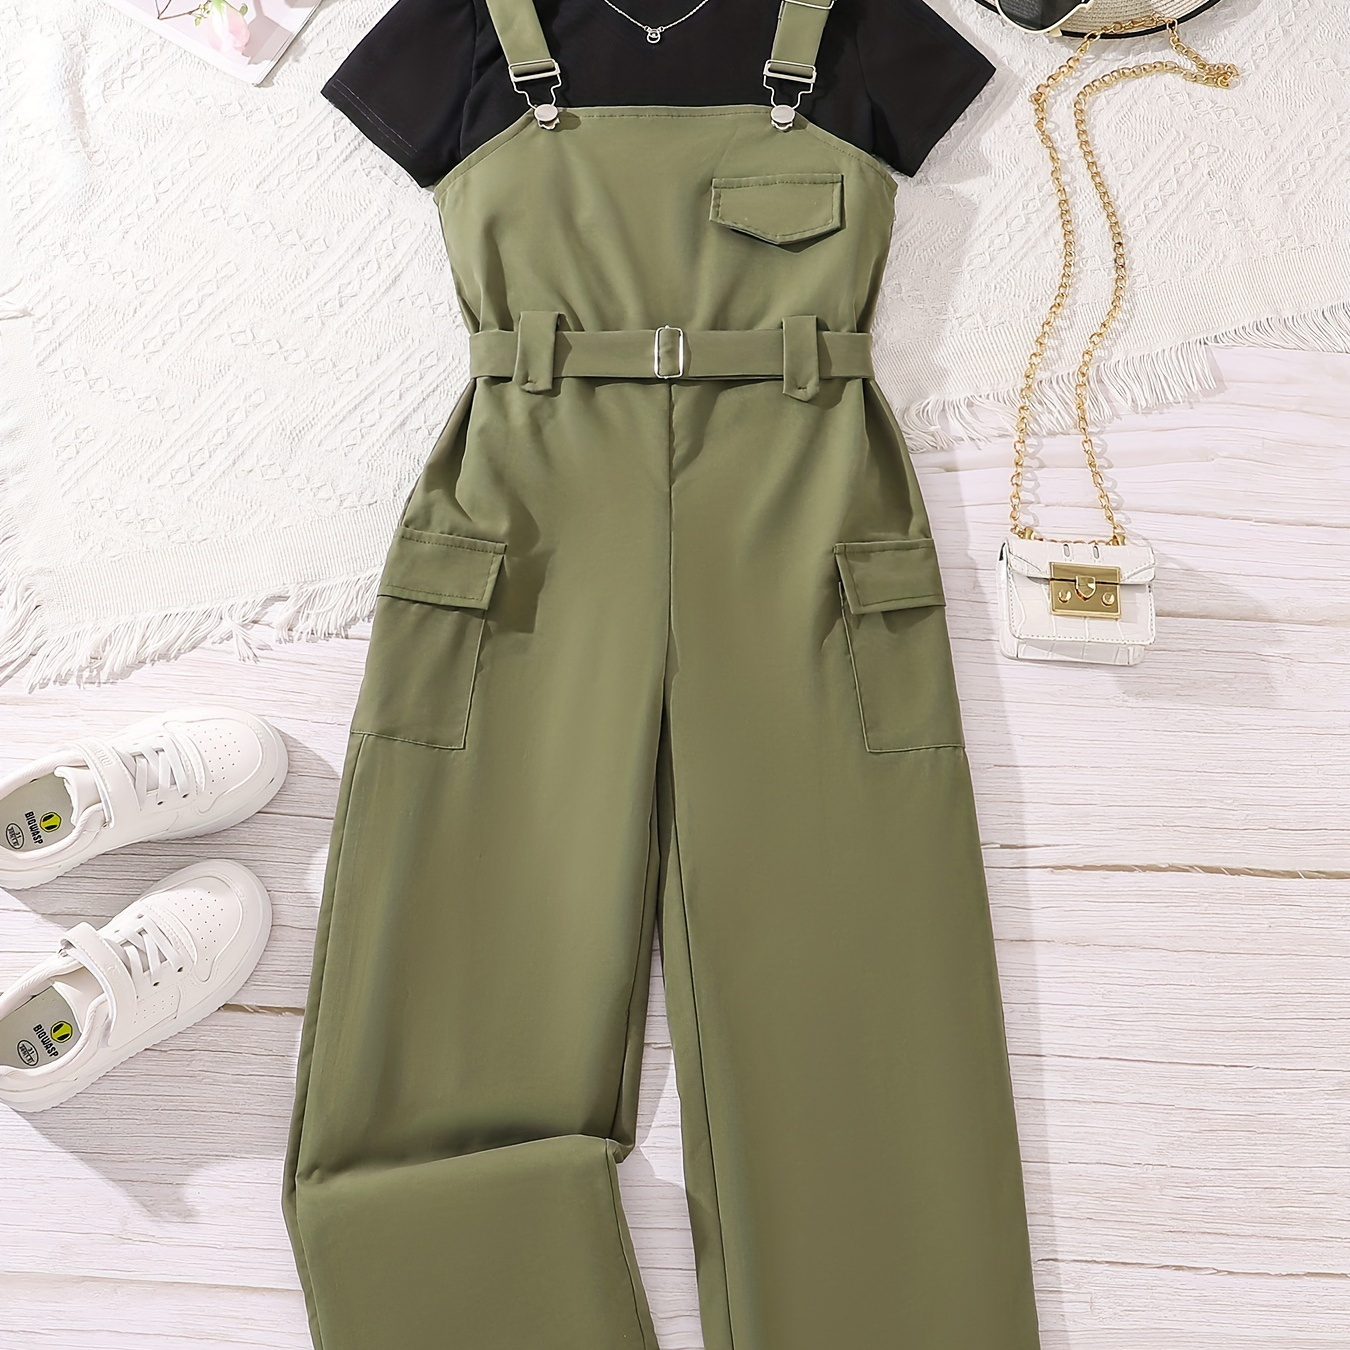 

2pcs, Basic Slim T-shirt + Suspender Overall Cargo Pants Girls Outfit 1 Set - Ideal For Summer & Casual Outings